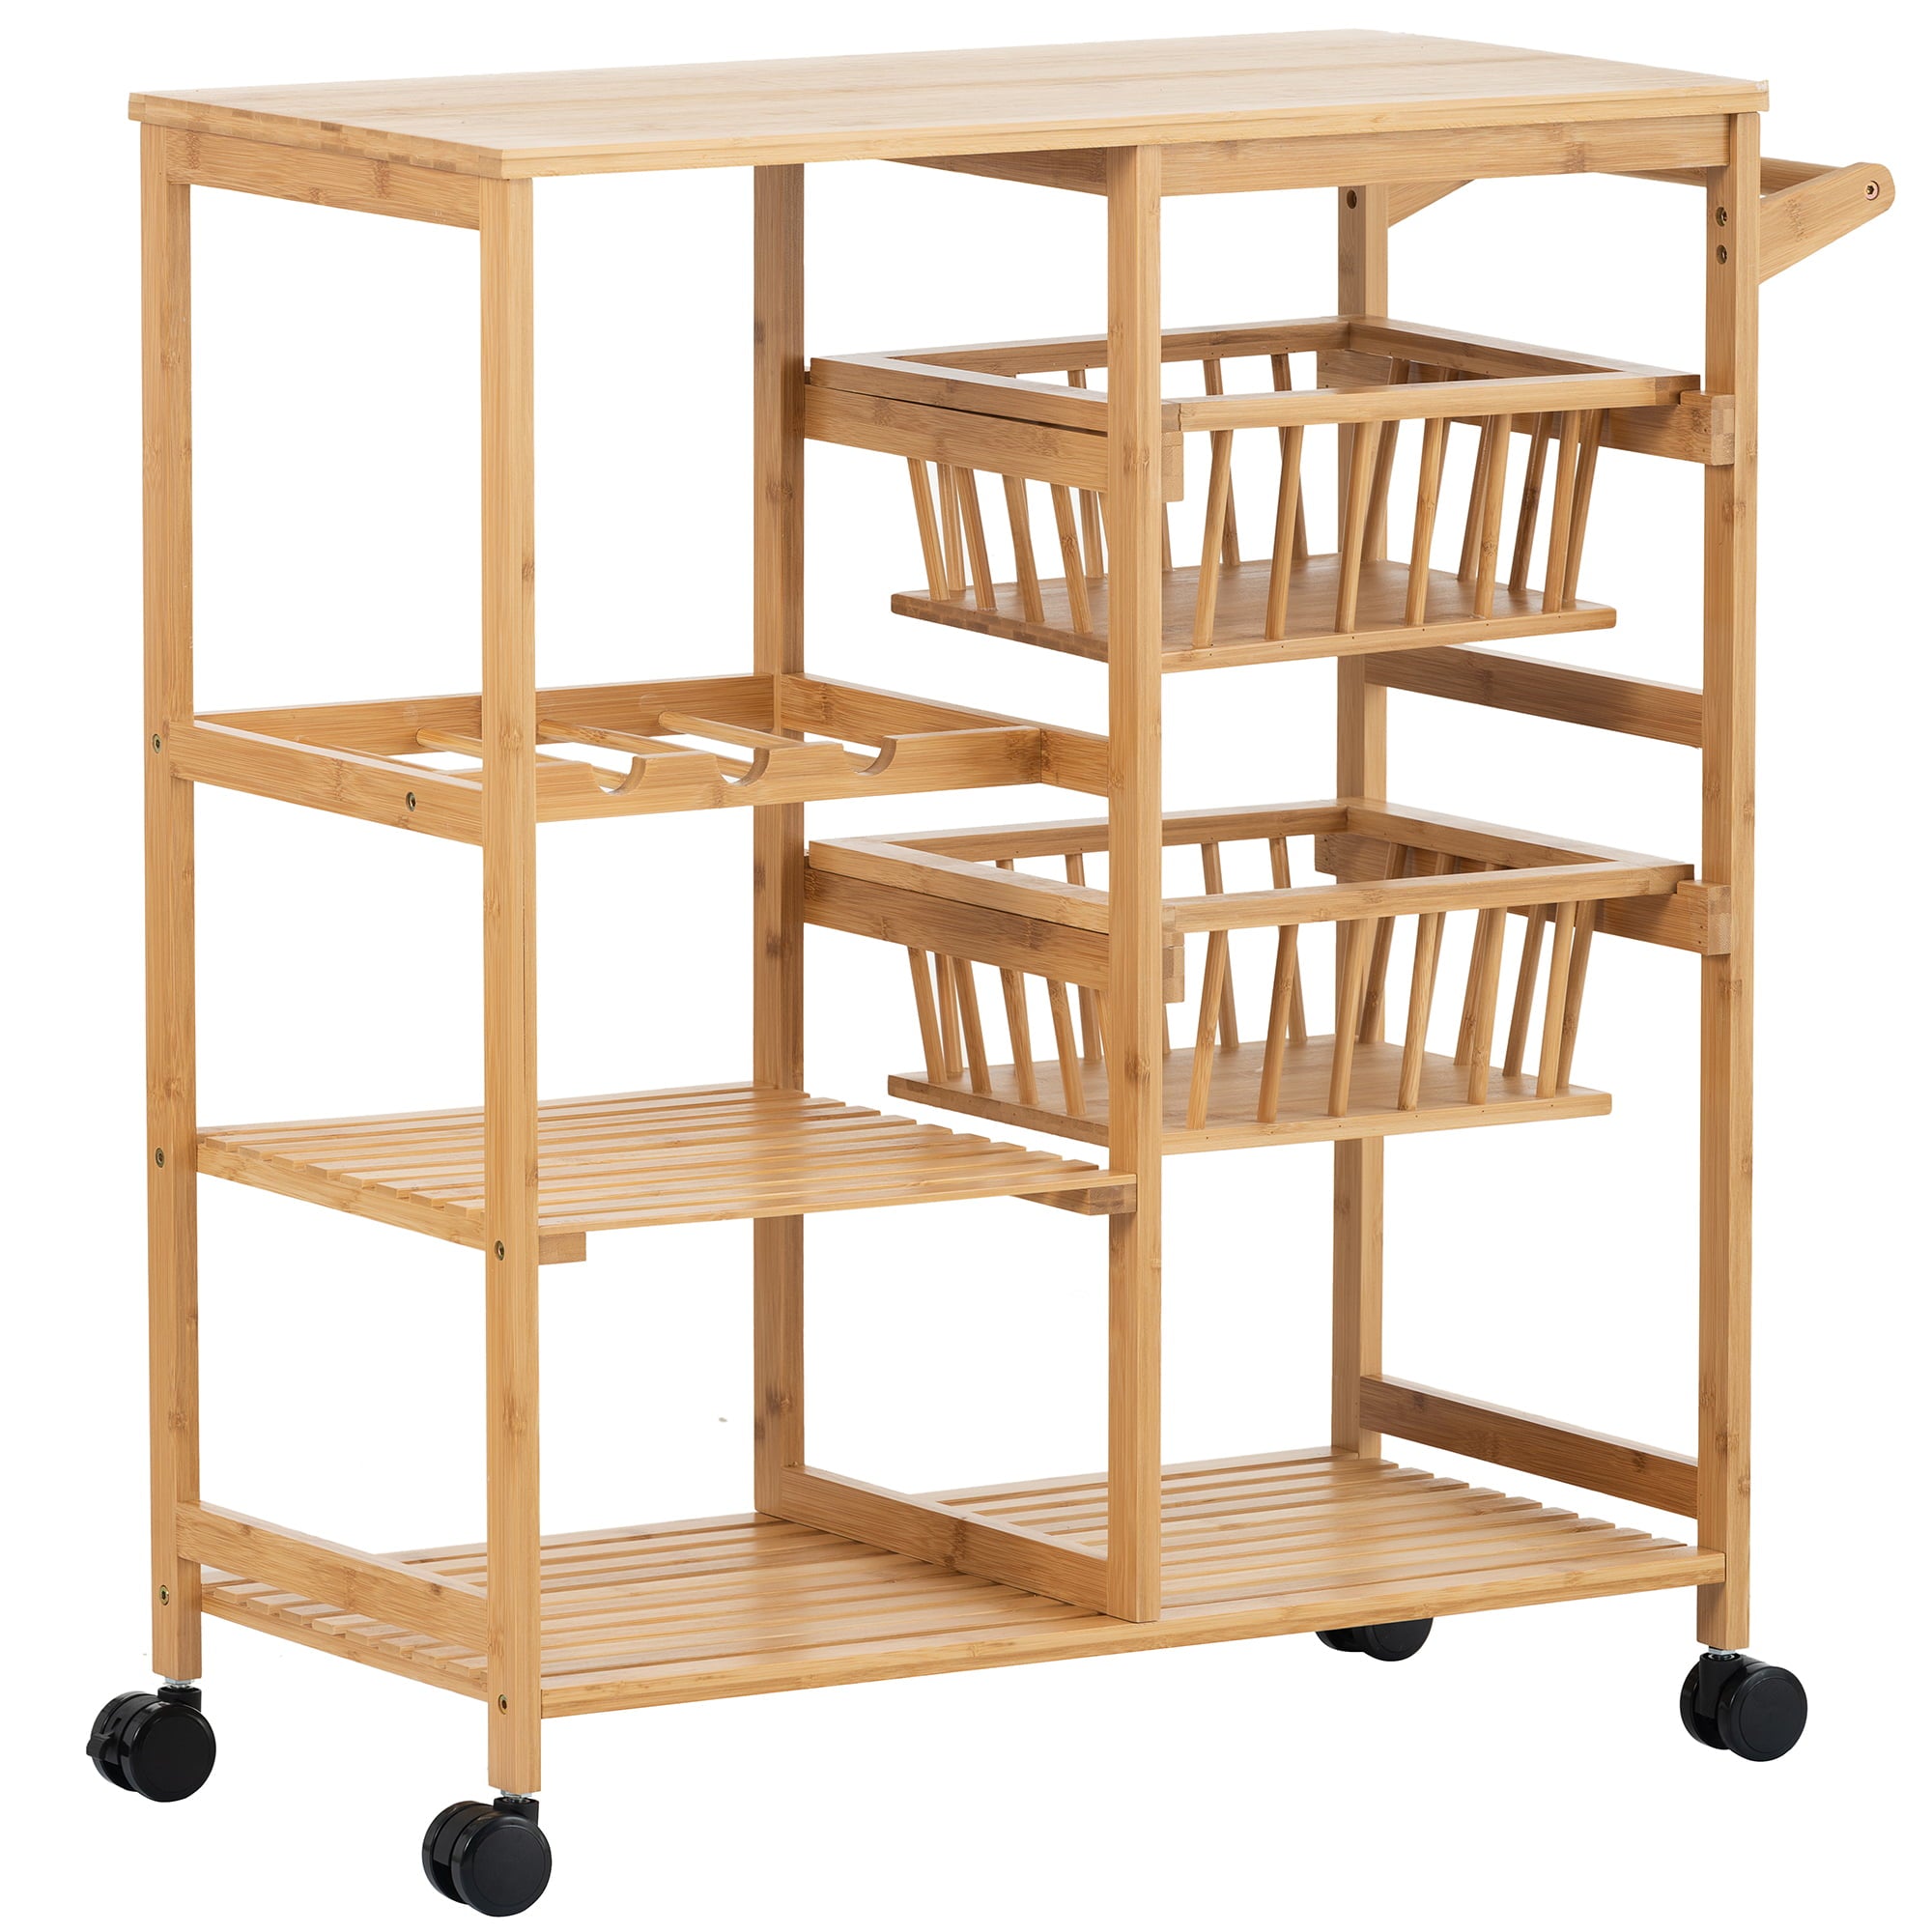 uhomepro Kitchen Rolling Microwave Cart on Wheels， Microwave Oven Stand Storage Cart on Wheels， Mobile Kitchen Cart， Bamboo Food Pantry Carts with Wine Rack， 3 Shelves， 2 Baskets